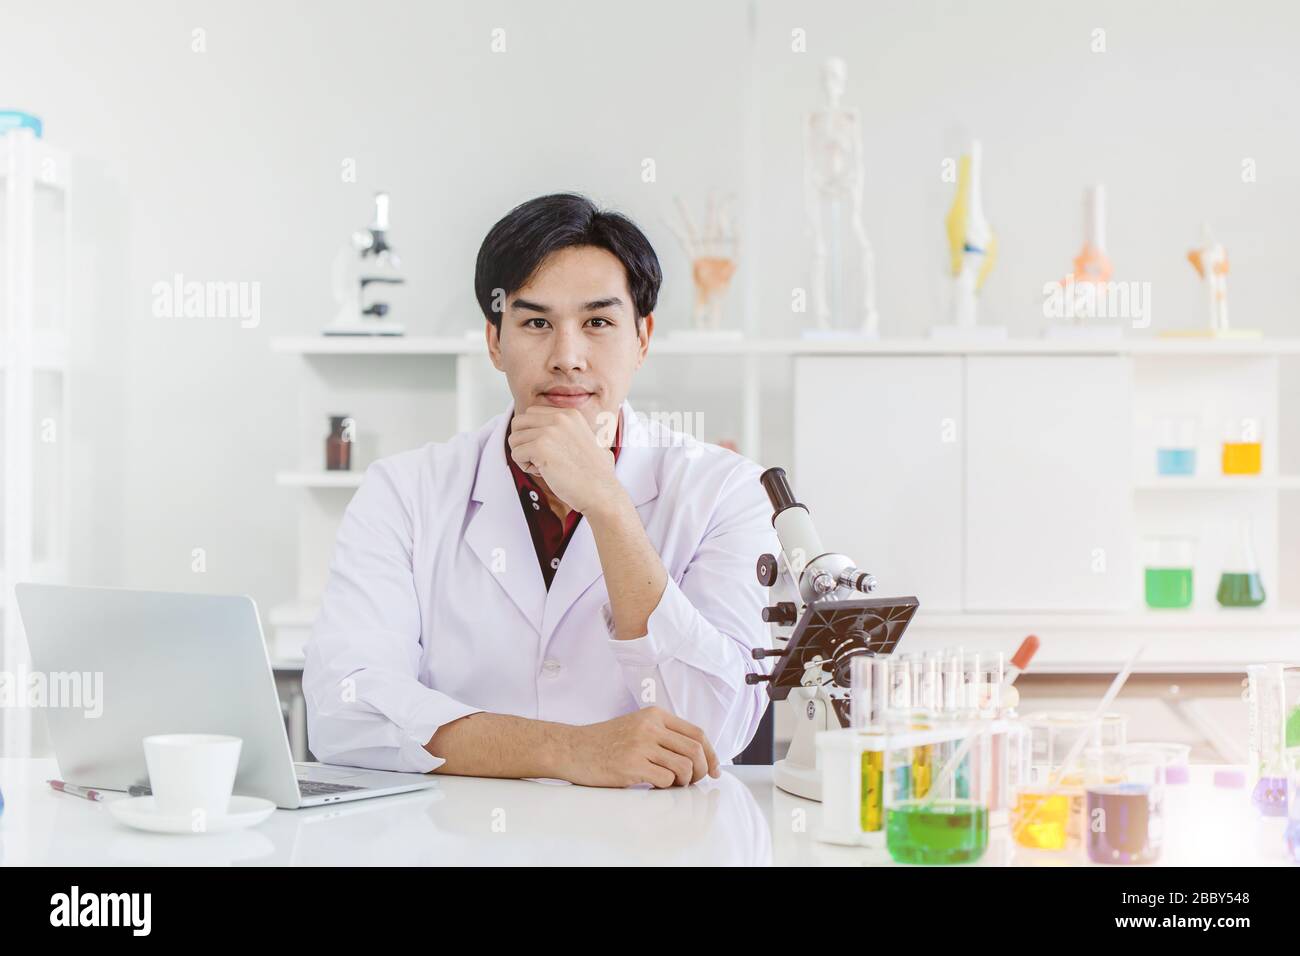 Young Handsome Scientist sitting in laboratory working desk Asian race looking camera hand at chin Stock Photo